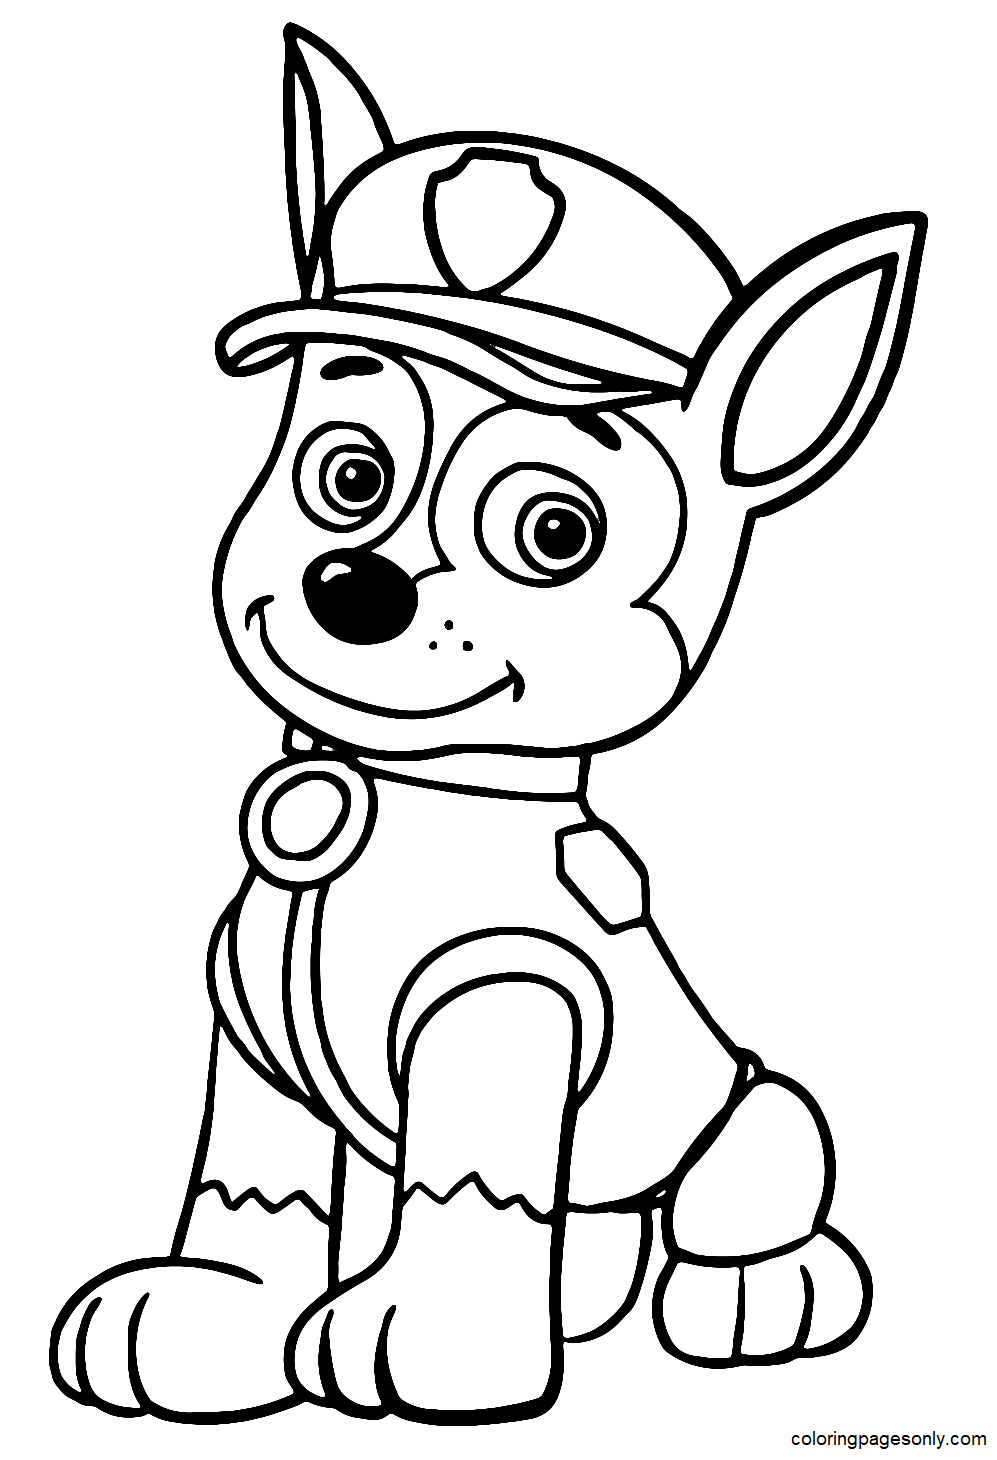 Chase The Police Dog Is Resting Sitting Coloring Page